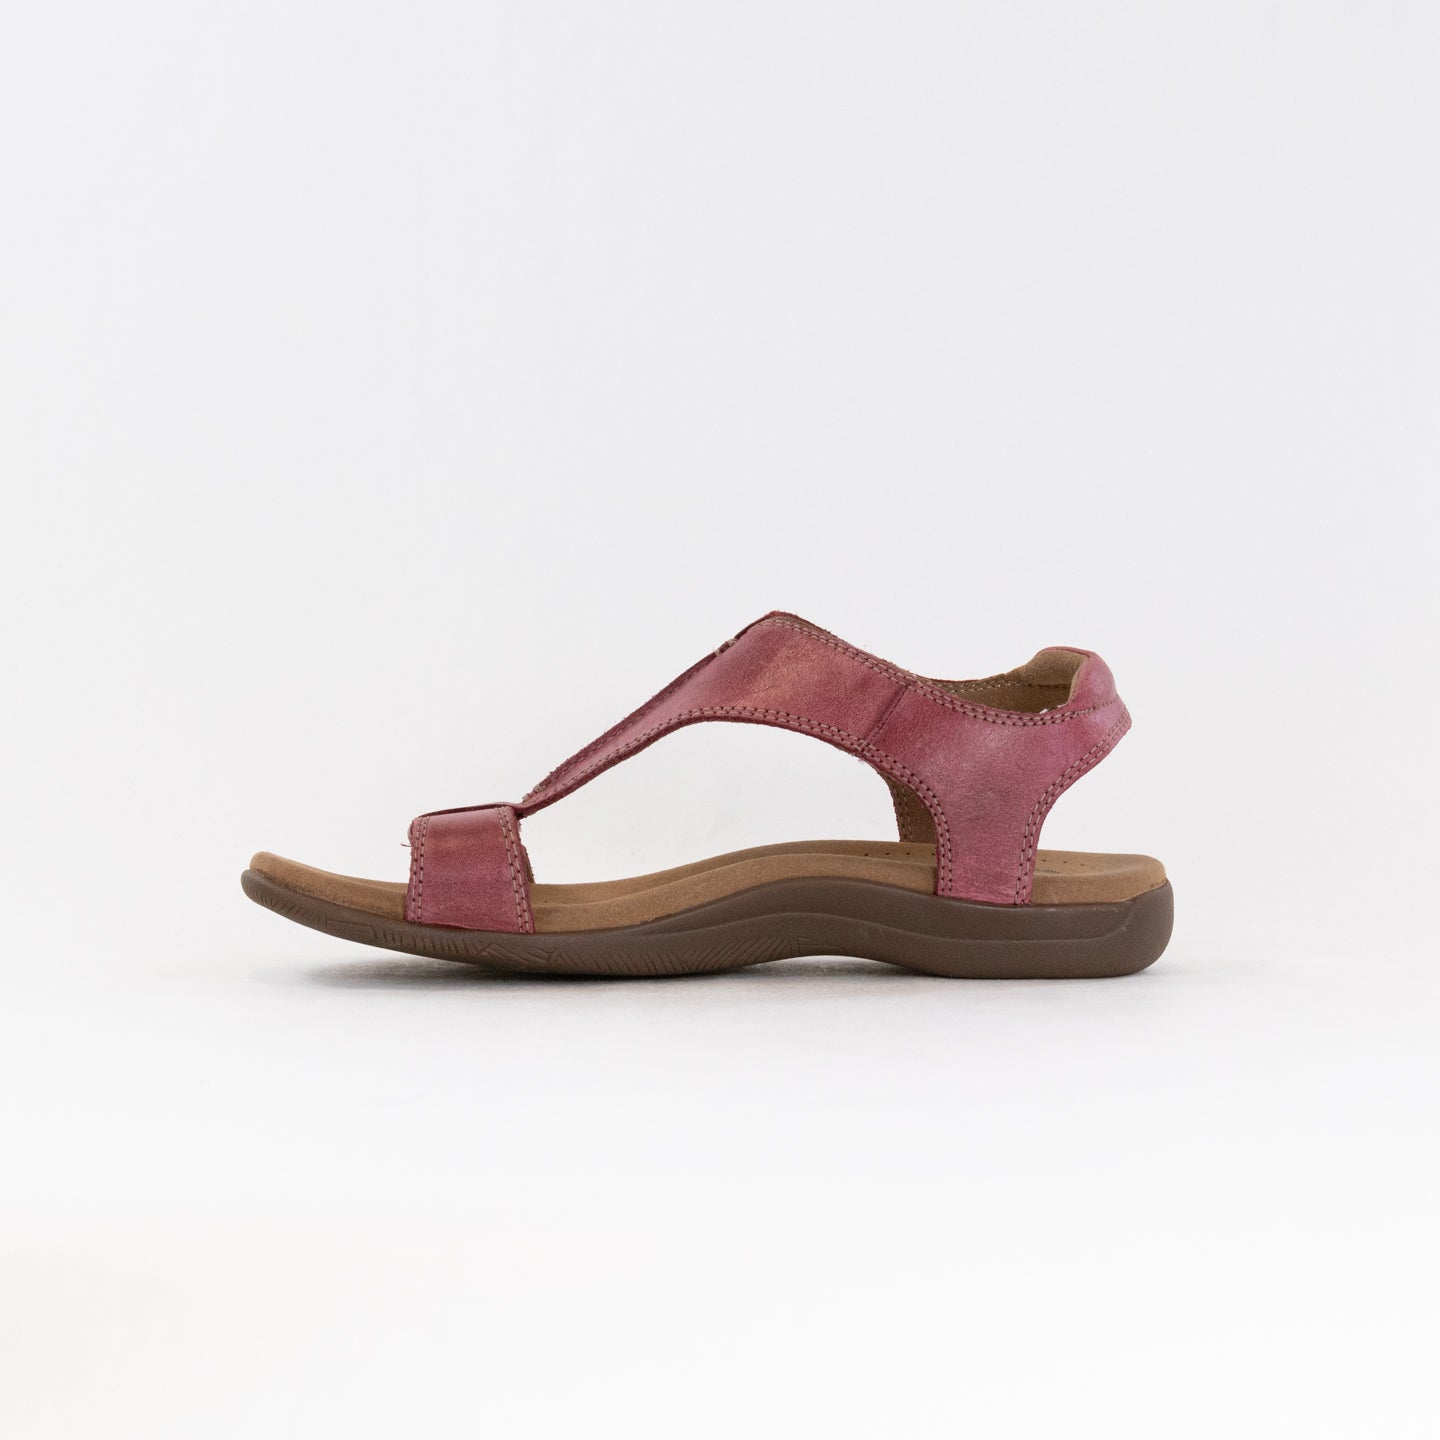 Taos The Show (Women's) - Warm Red